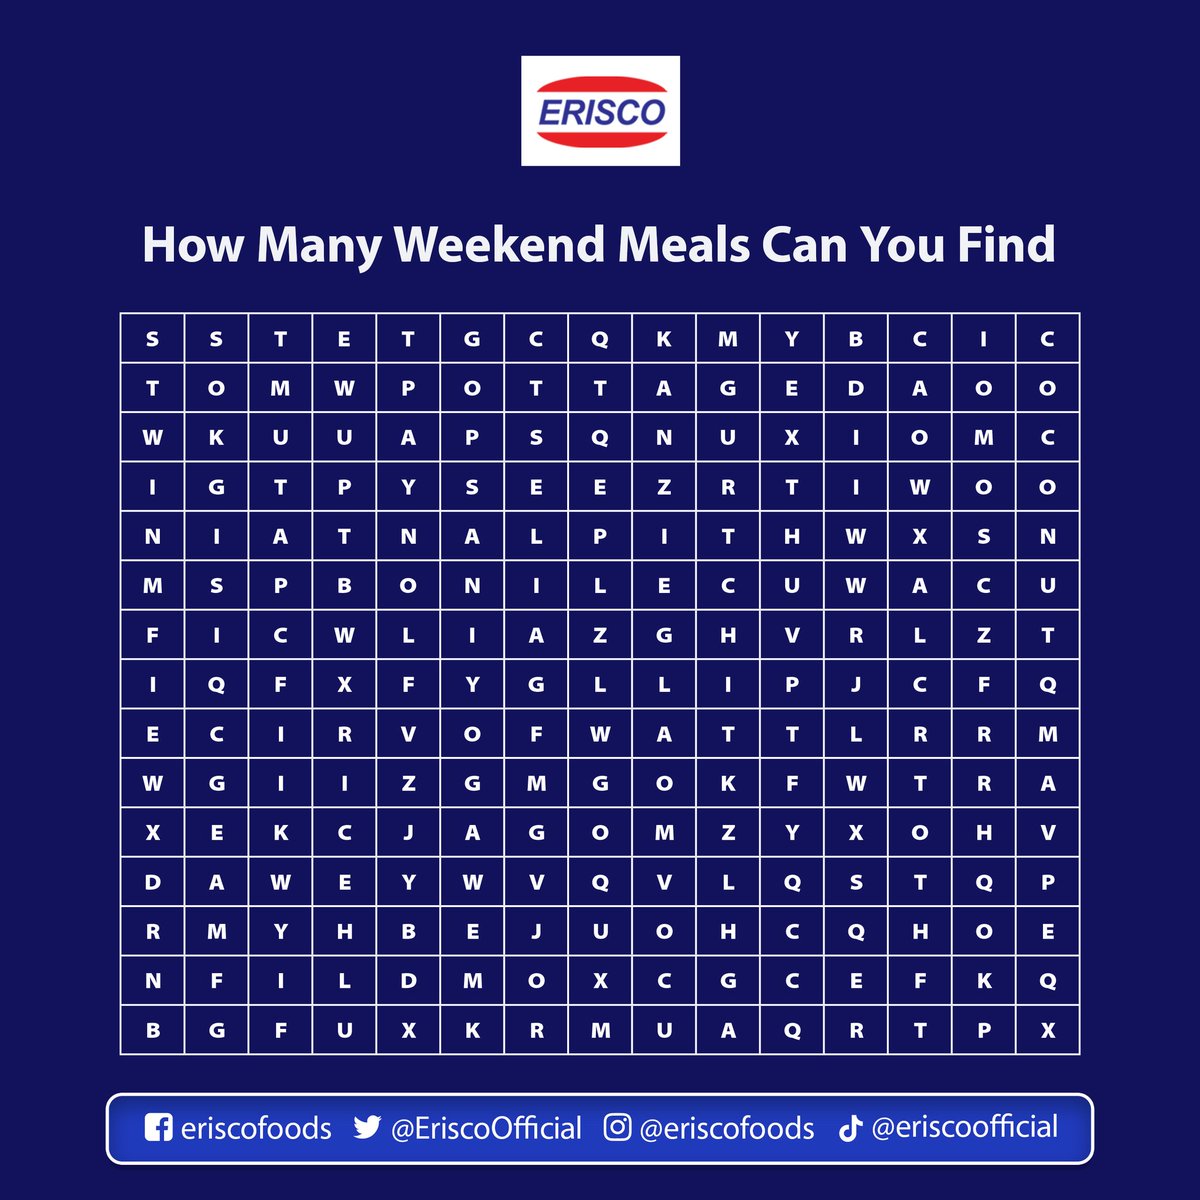 Hello Fams, it's game time! How many weekend meals can you find in the puzzle? #weekendvibes #eriscocares